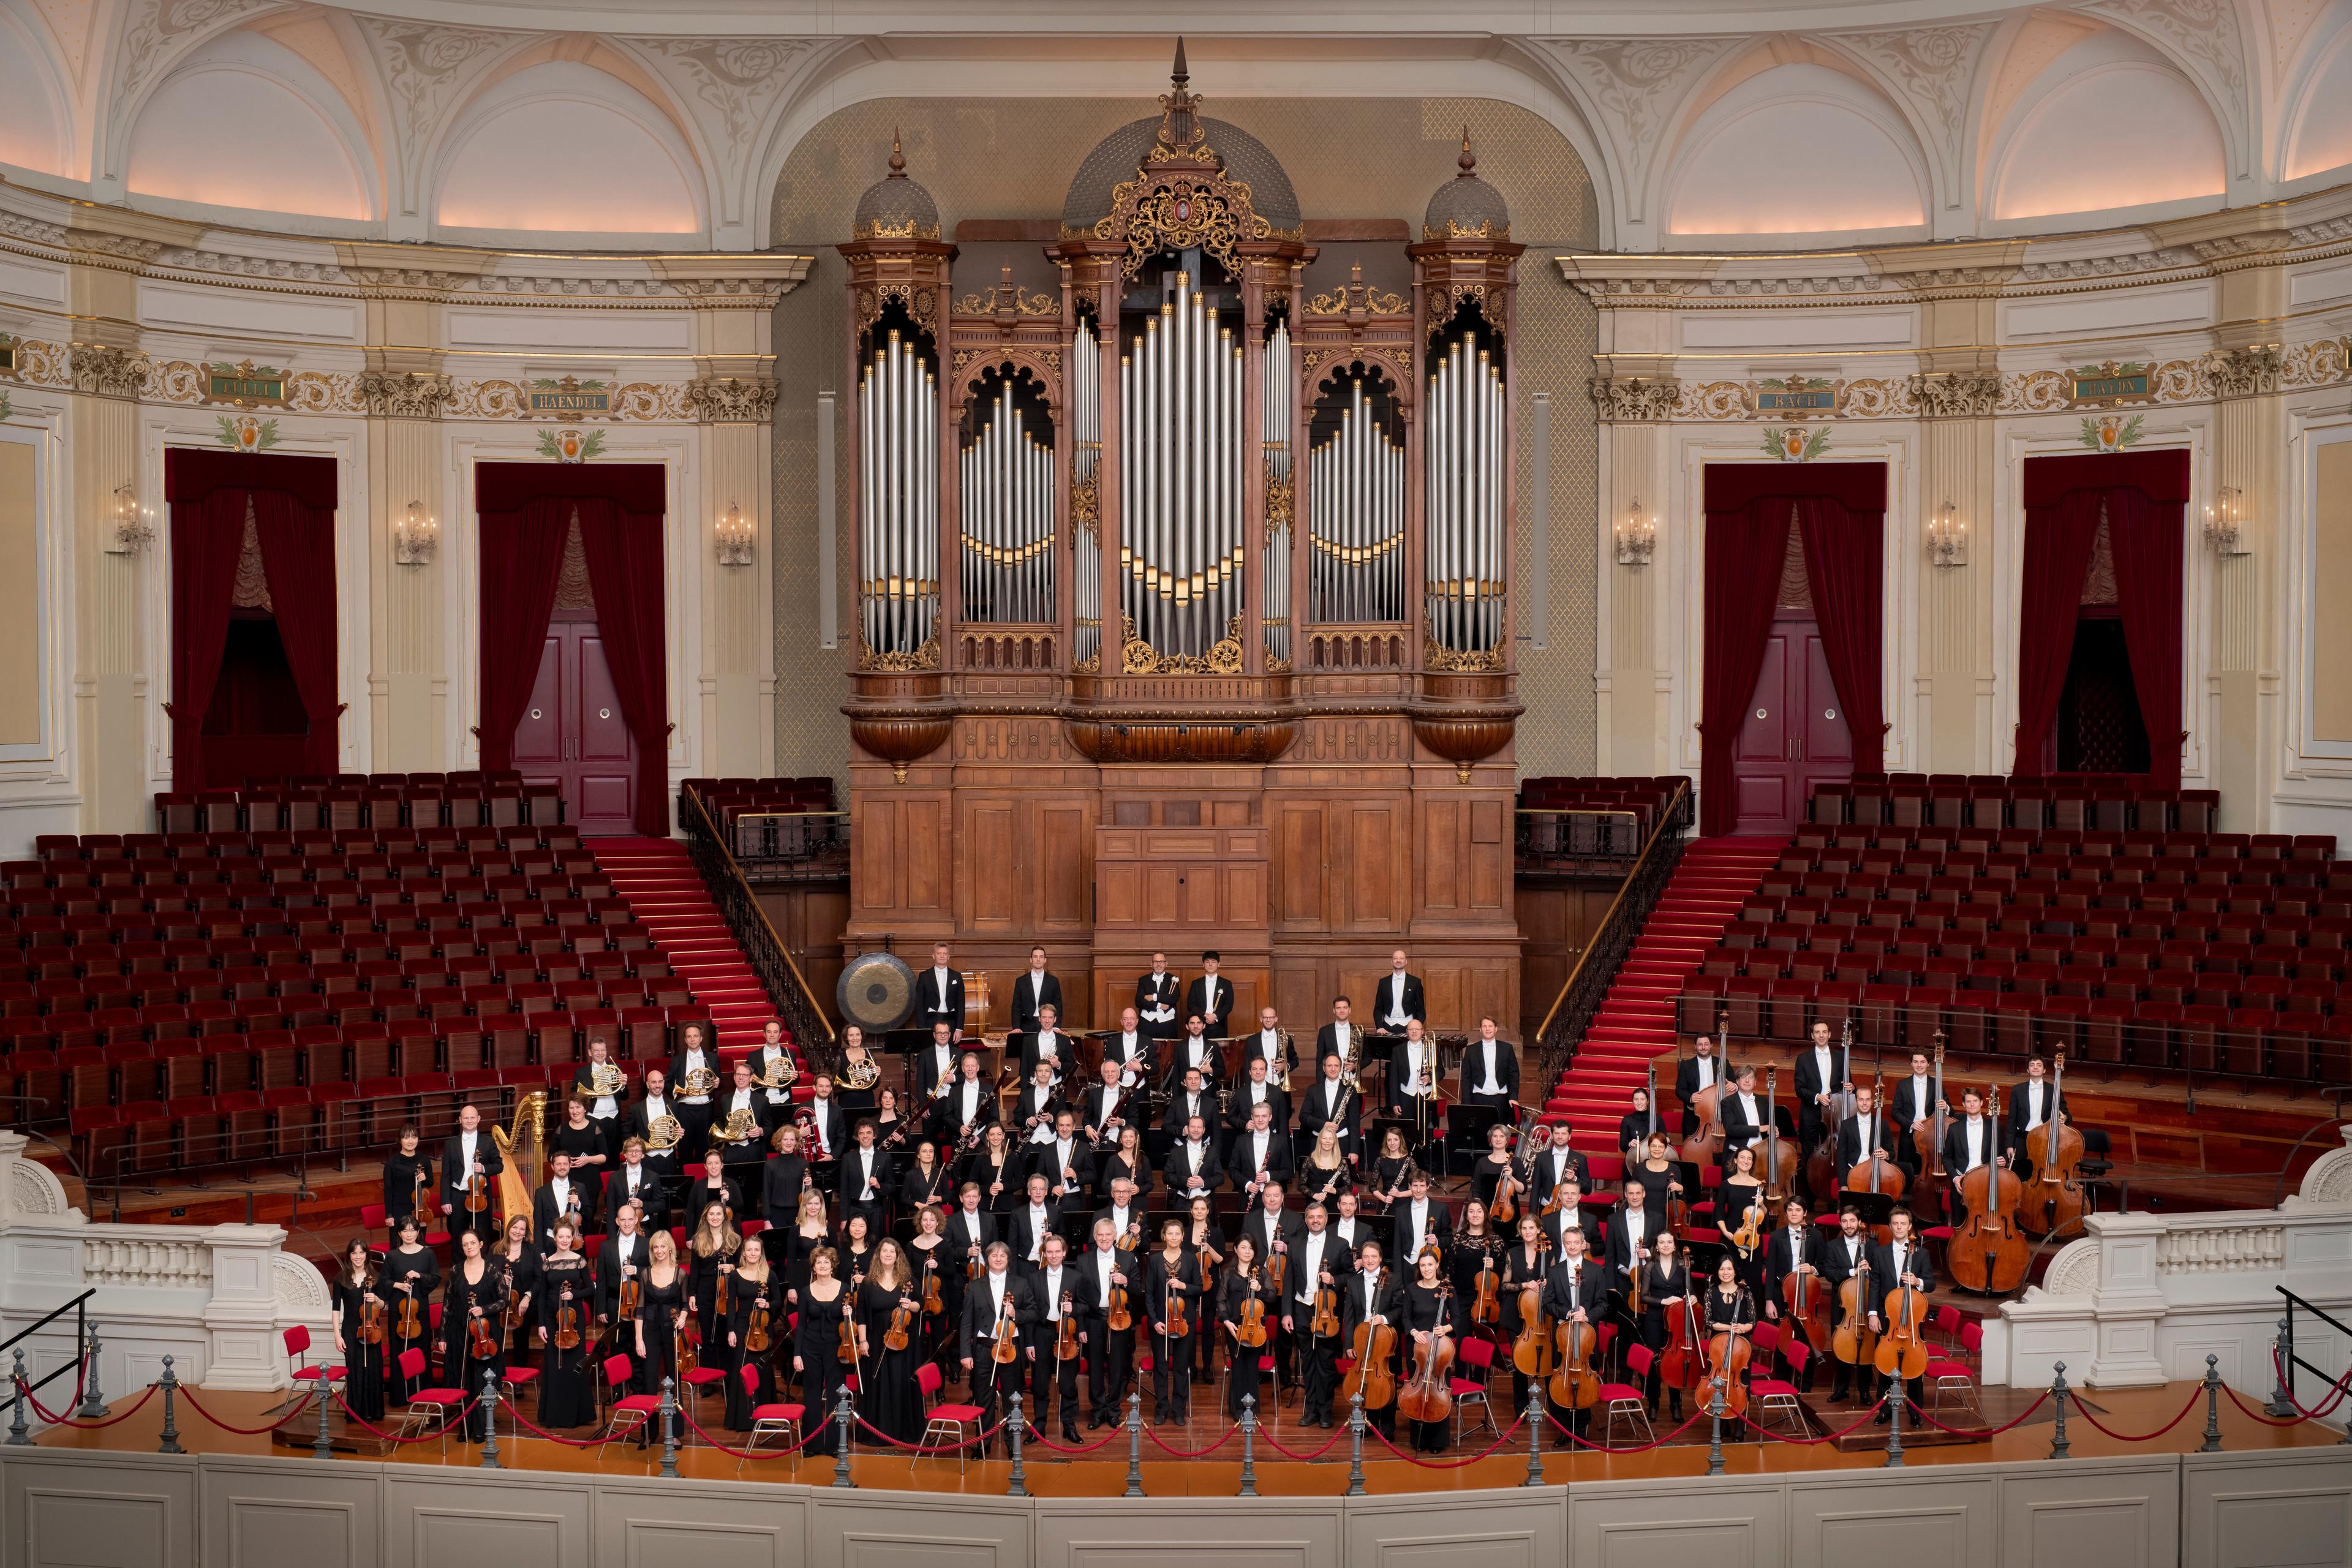 The Royal Concertgebouw Orchestra standing with their instruments on stage